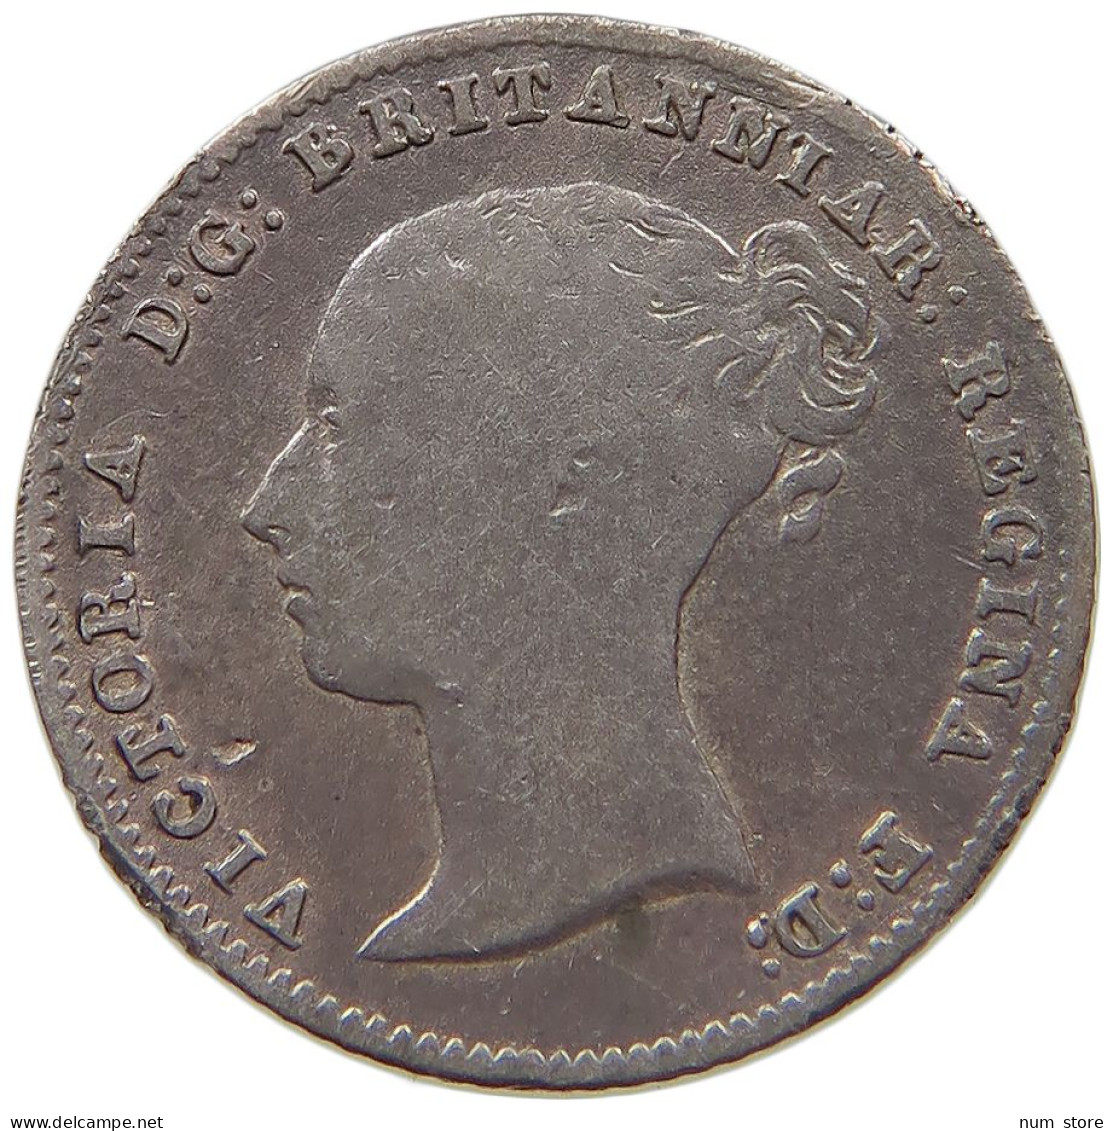 GREAT BRITAIN FOURPENCE 1843 VICTORIA 1837-1901 #MA 022955 - G. 4 Pence/ Groat